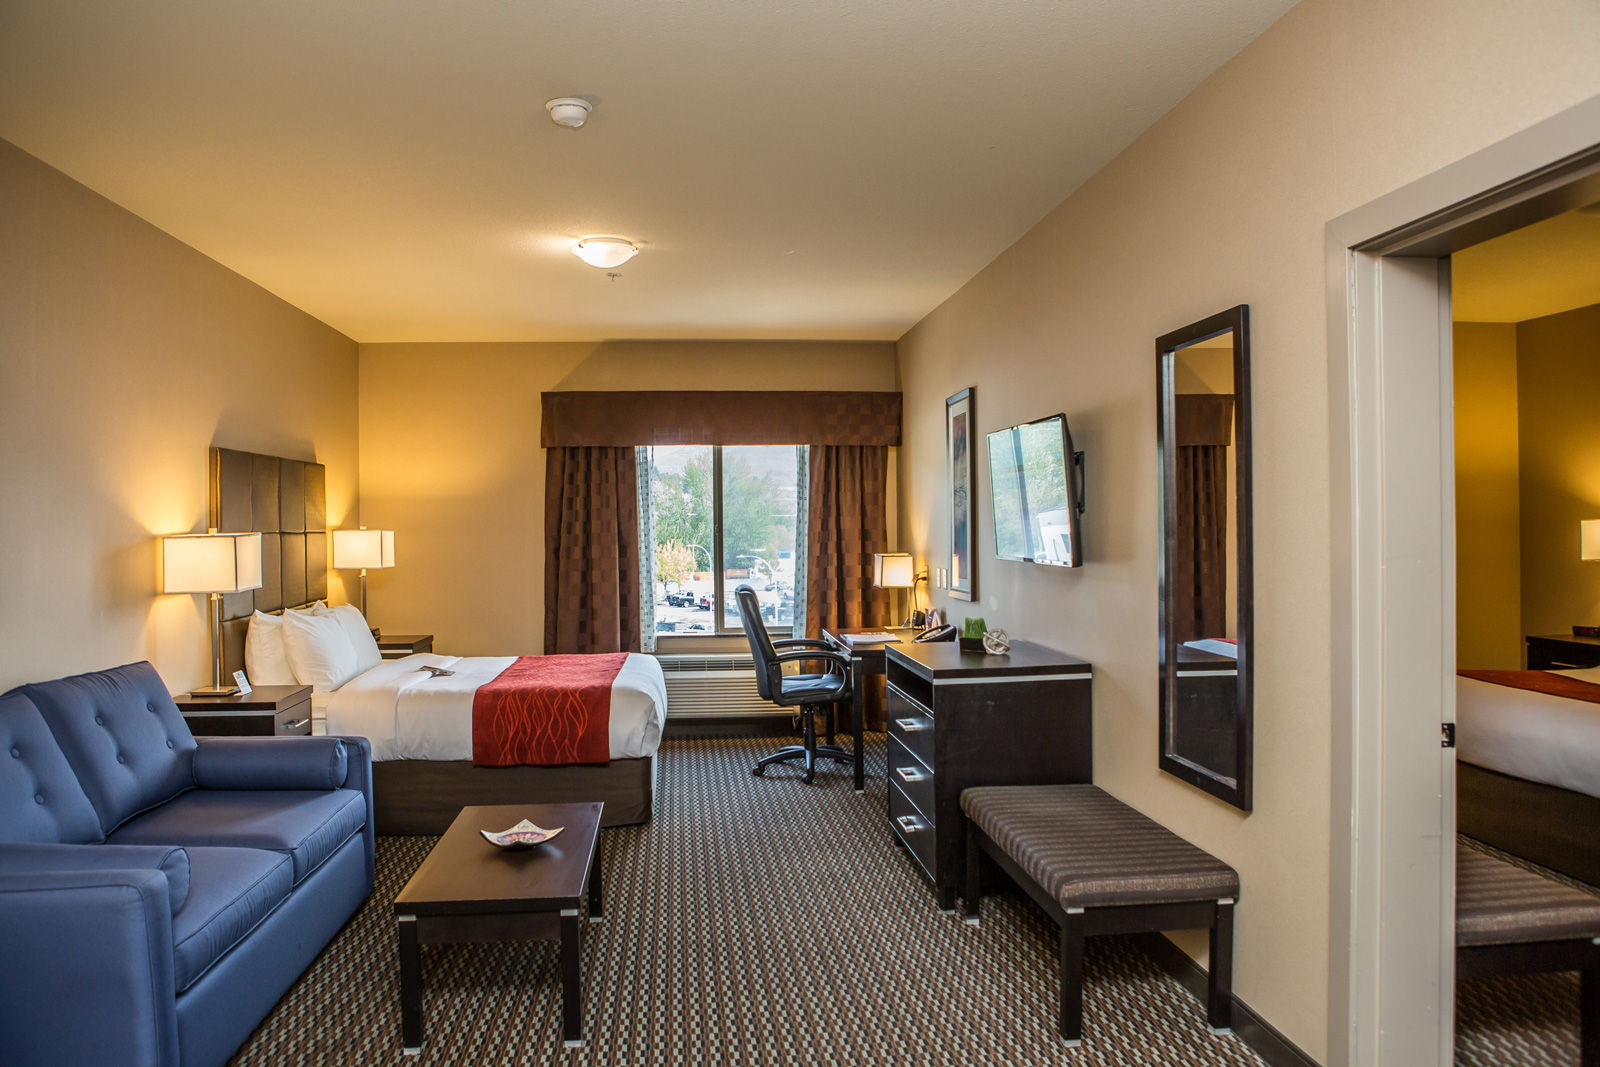 Our spacious suites have been recognized out of Kelowna hotels on TripAdvisor for their comfortable amenities.